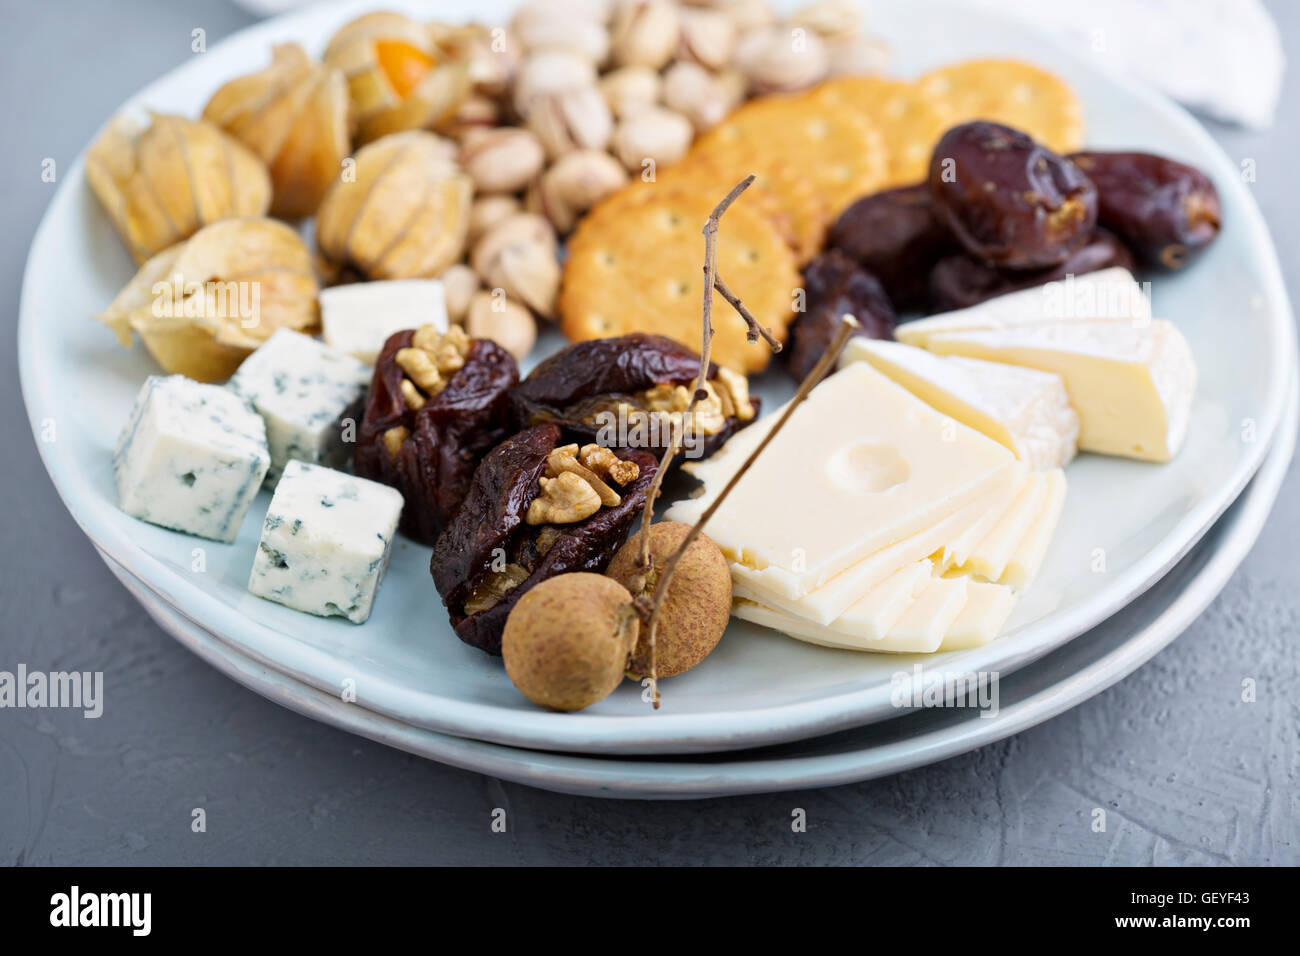 Cheese plate with crackers, dates and nuts Stock Photo